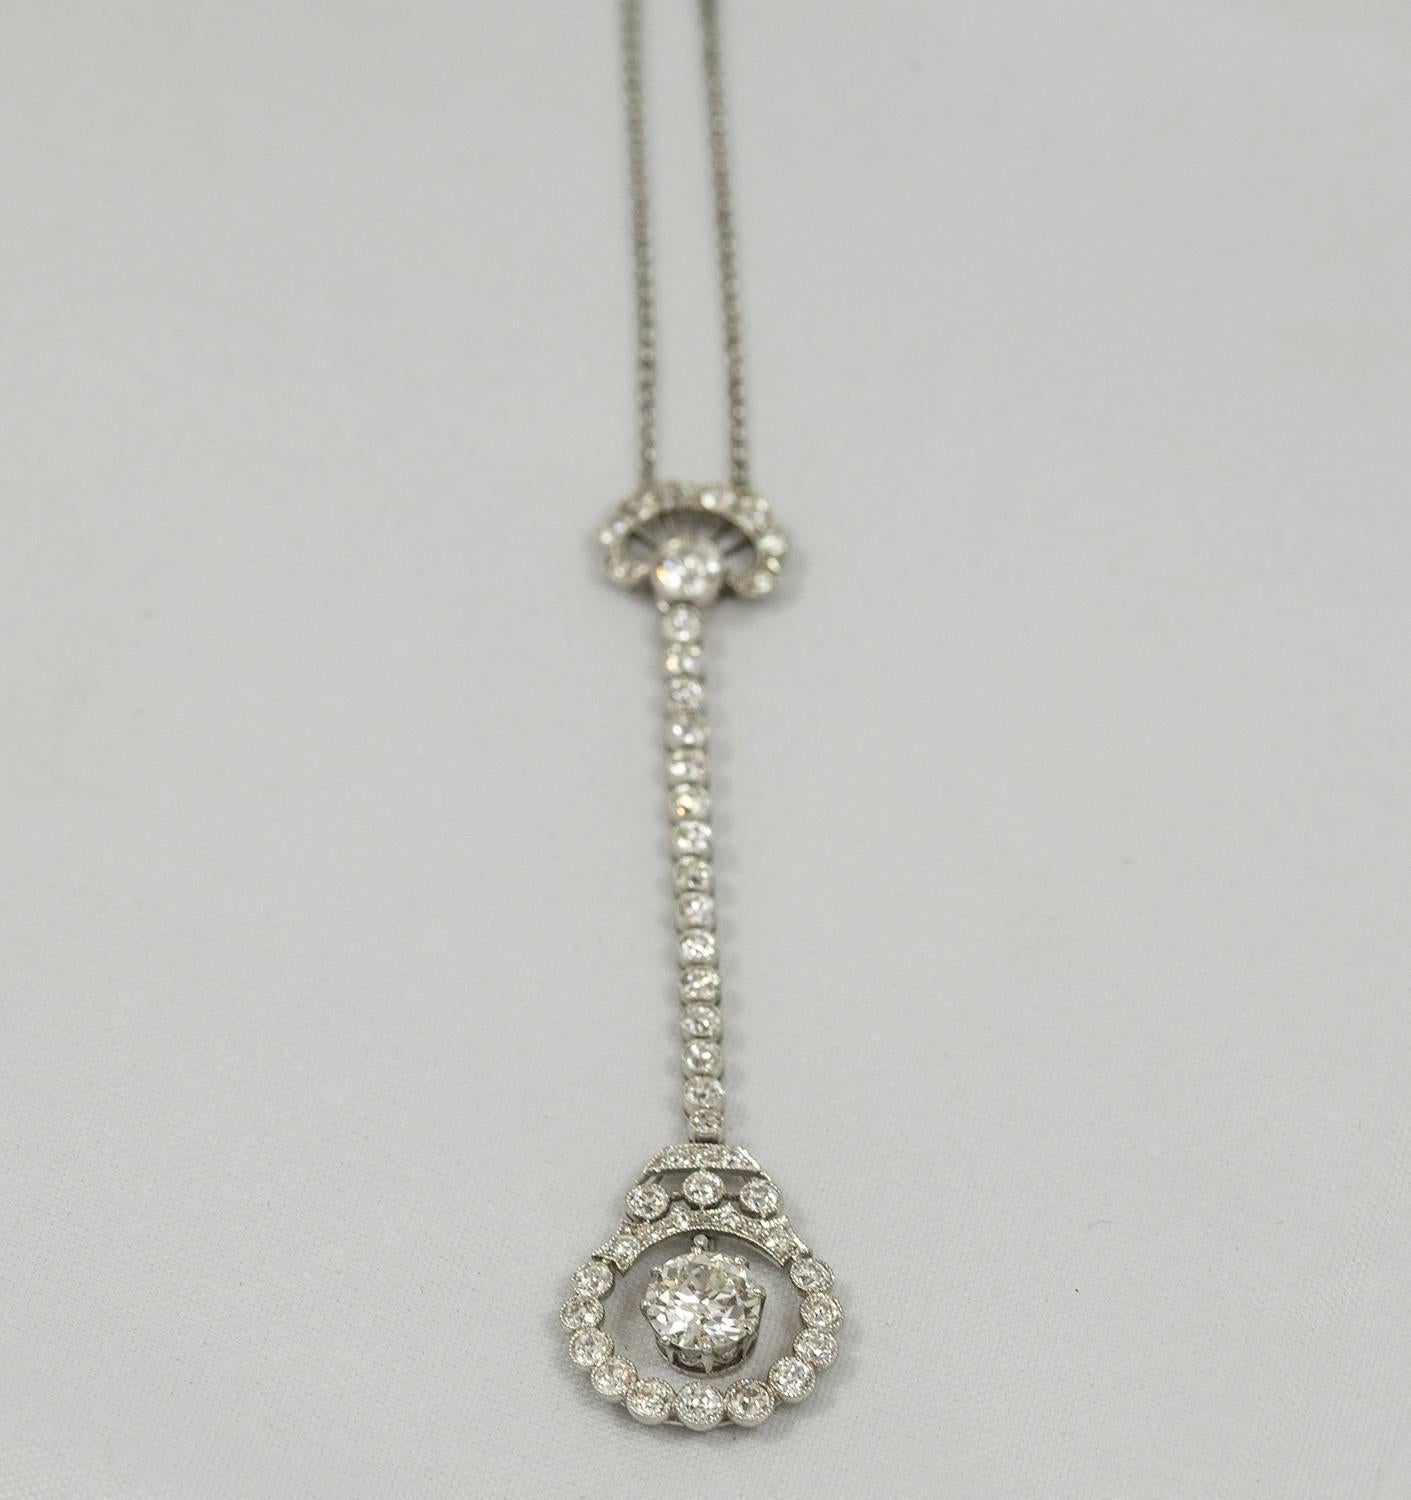 This beautiful Art Nouveau diamond necklace was made circa 1915. The large central old European cut diamond weighs .96 ct. (H colour, VVS2). It is suspended on a strand of old European cut diamonds which holds a circular embellished frame. In total